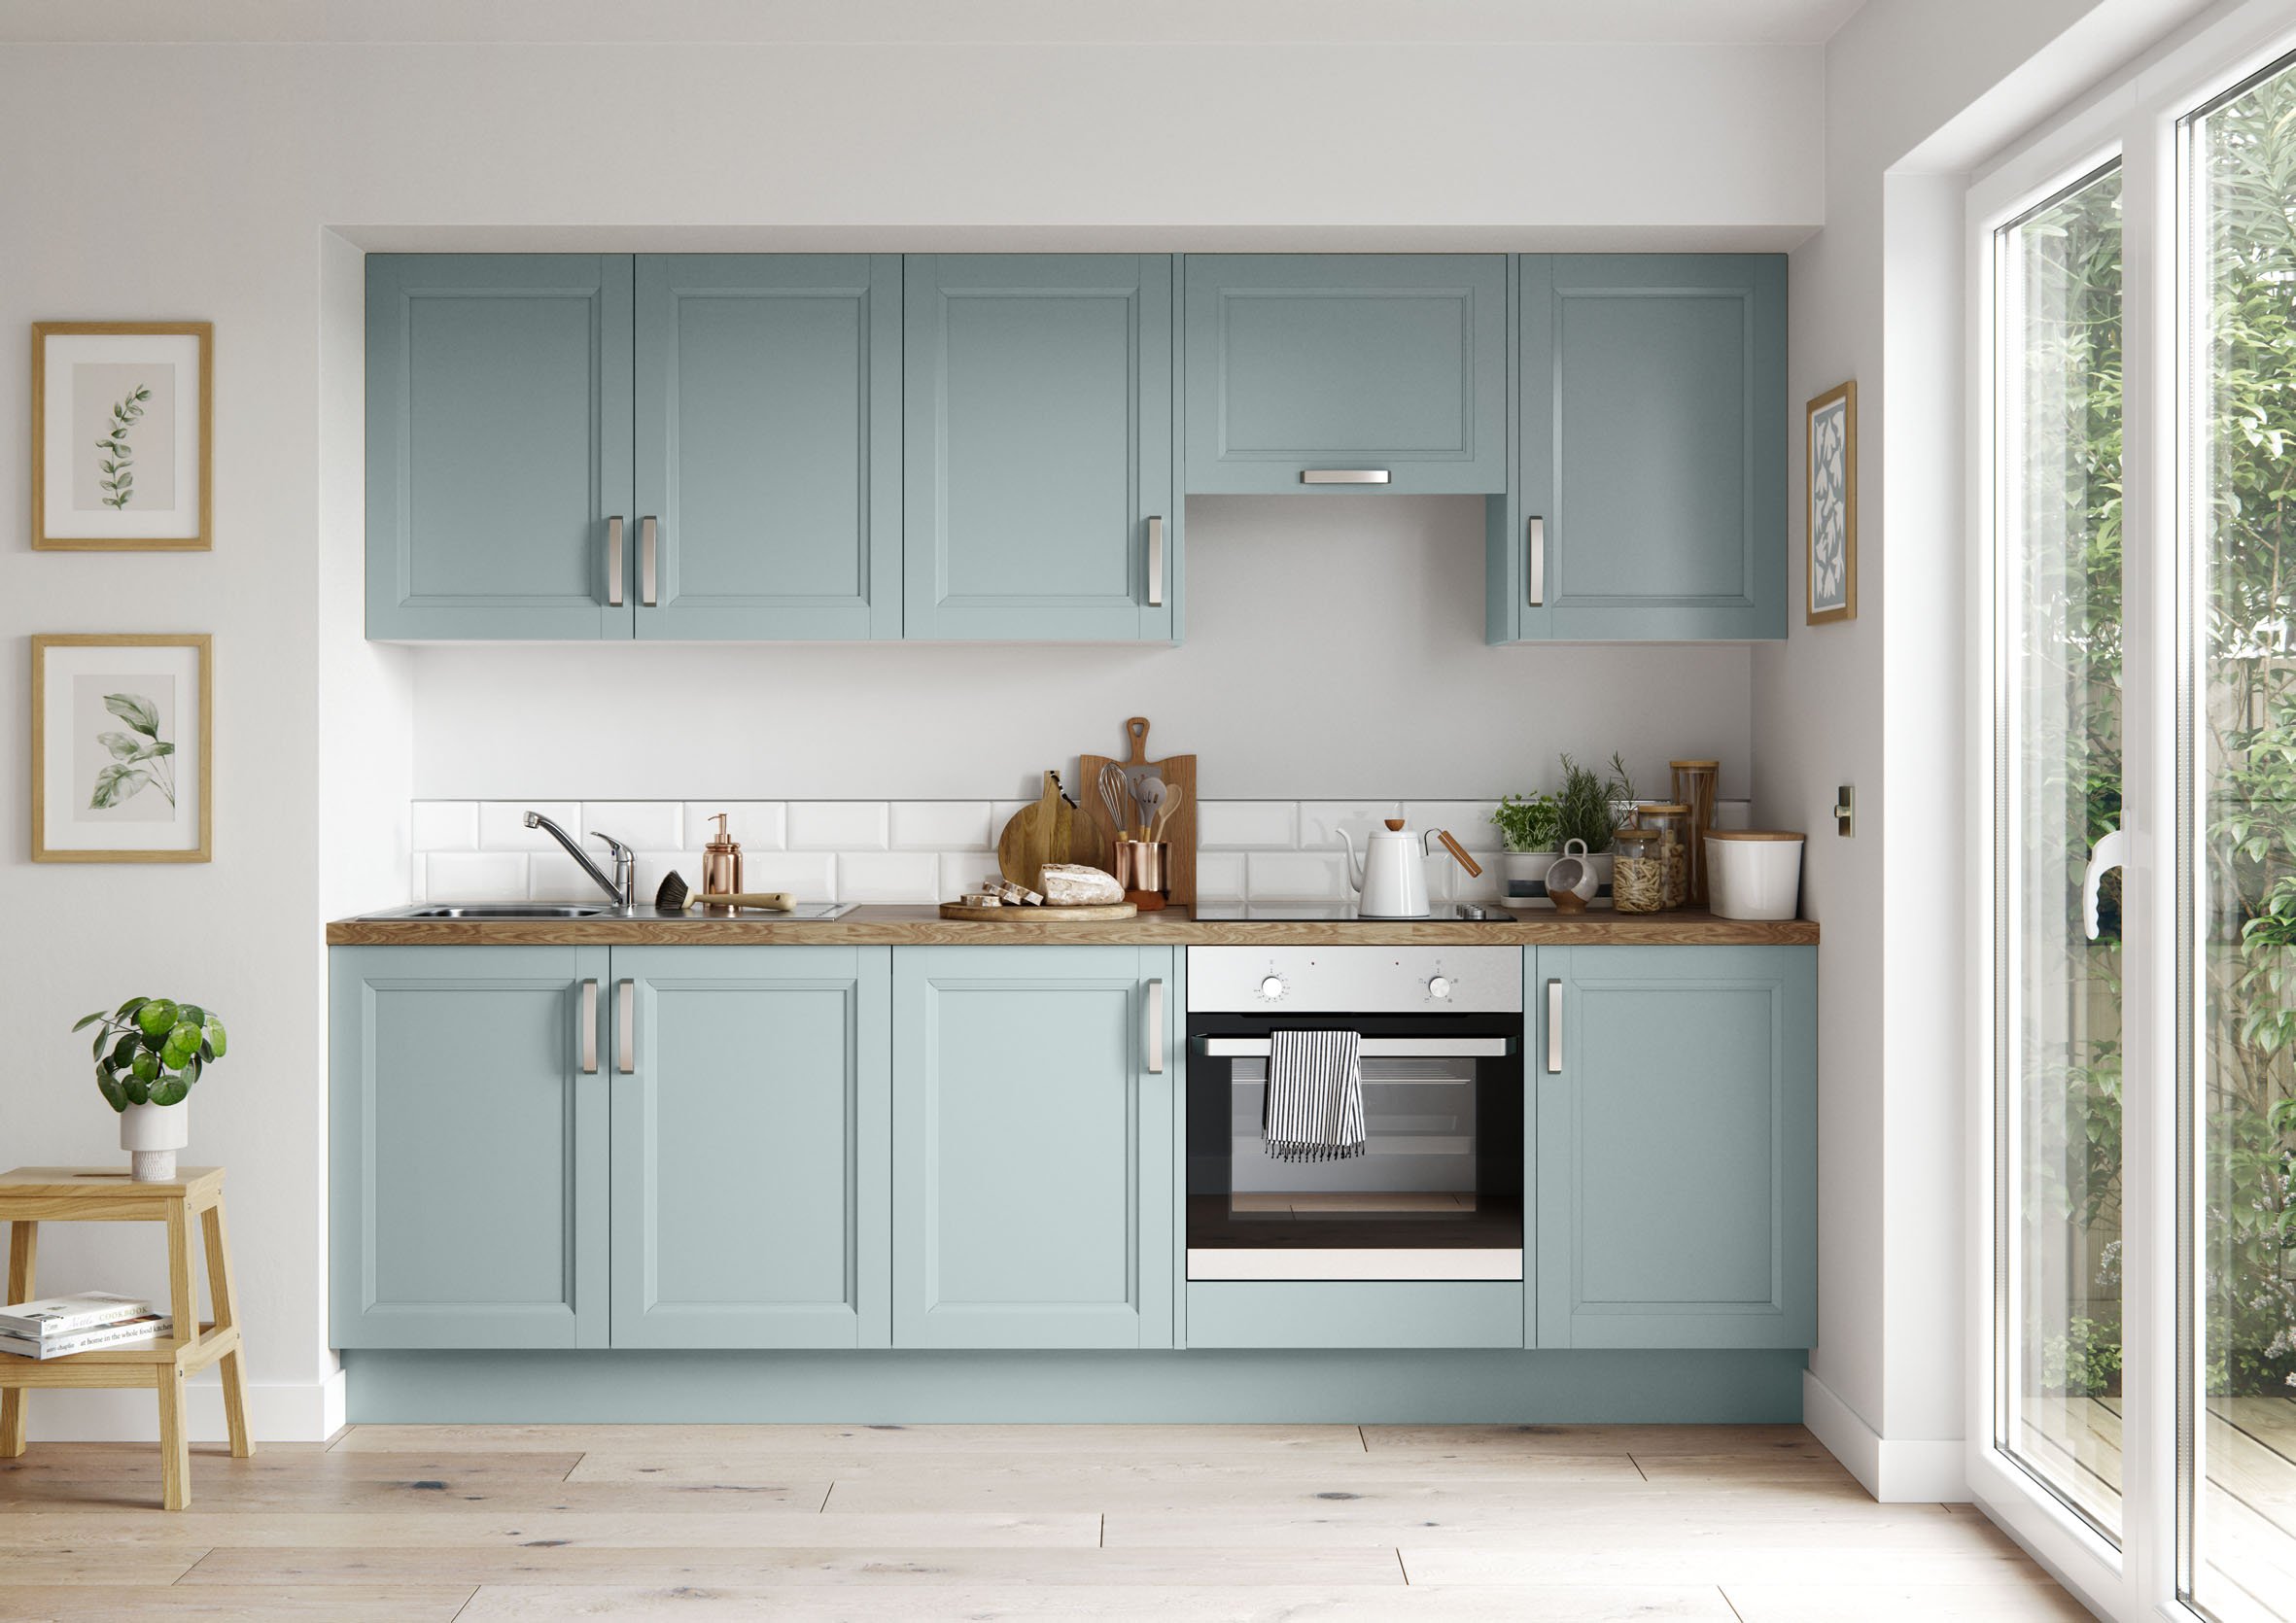 Painted kitchen cupboards